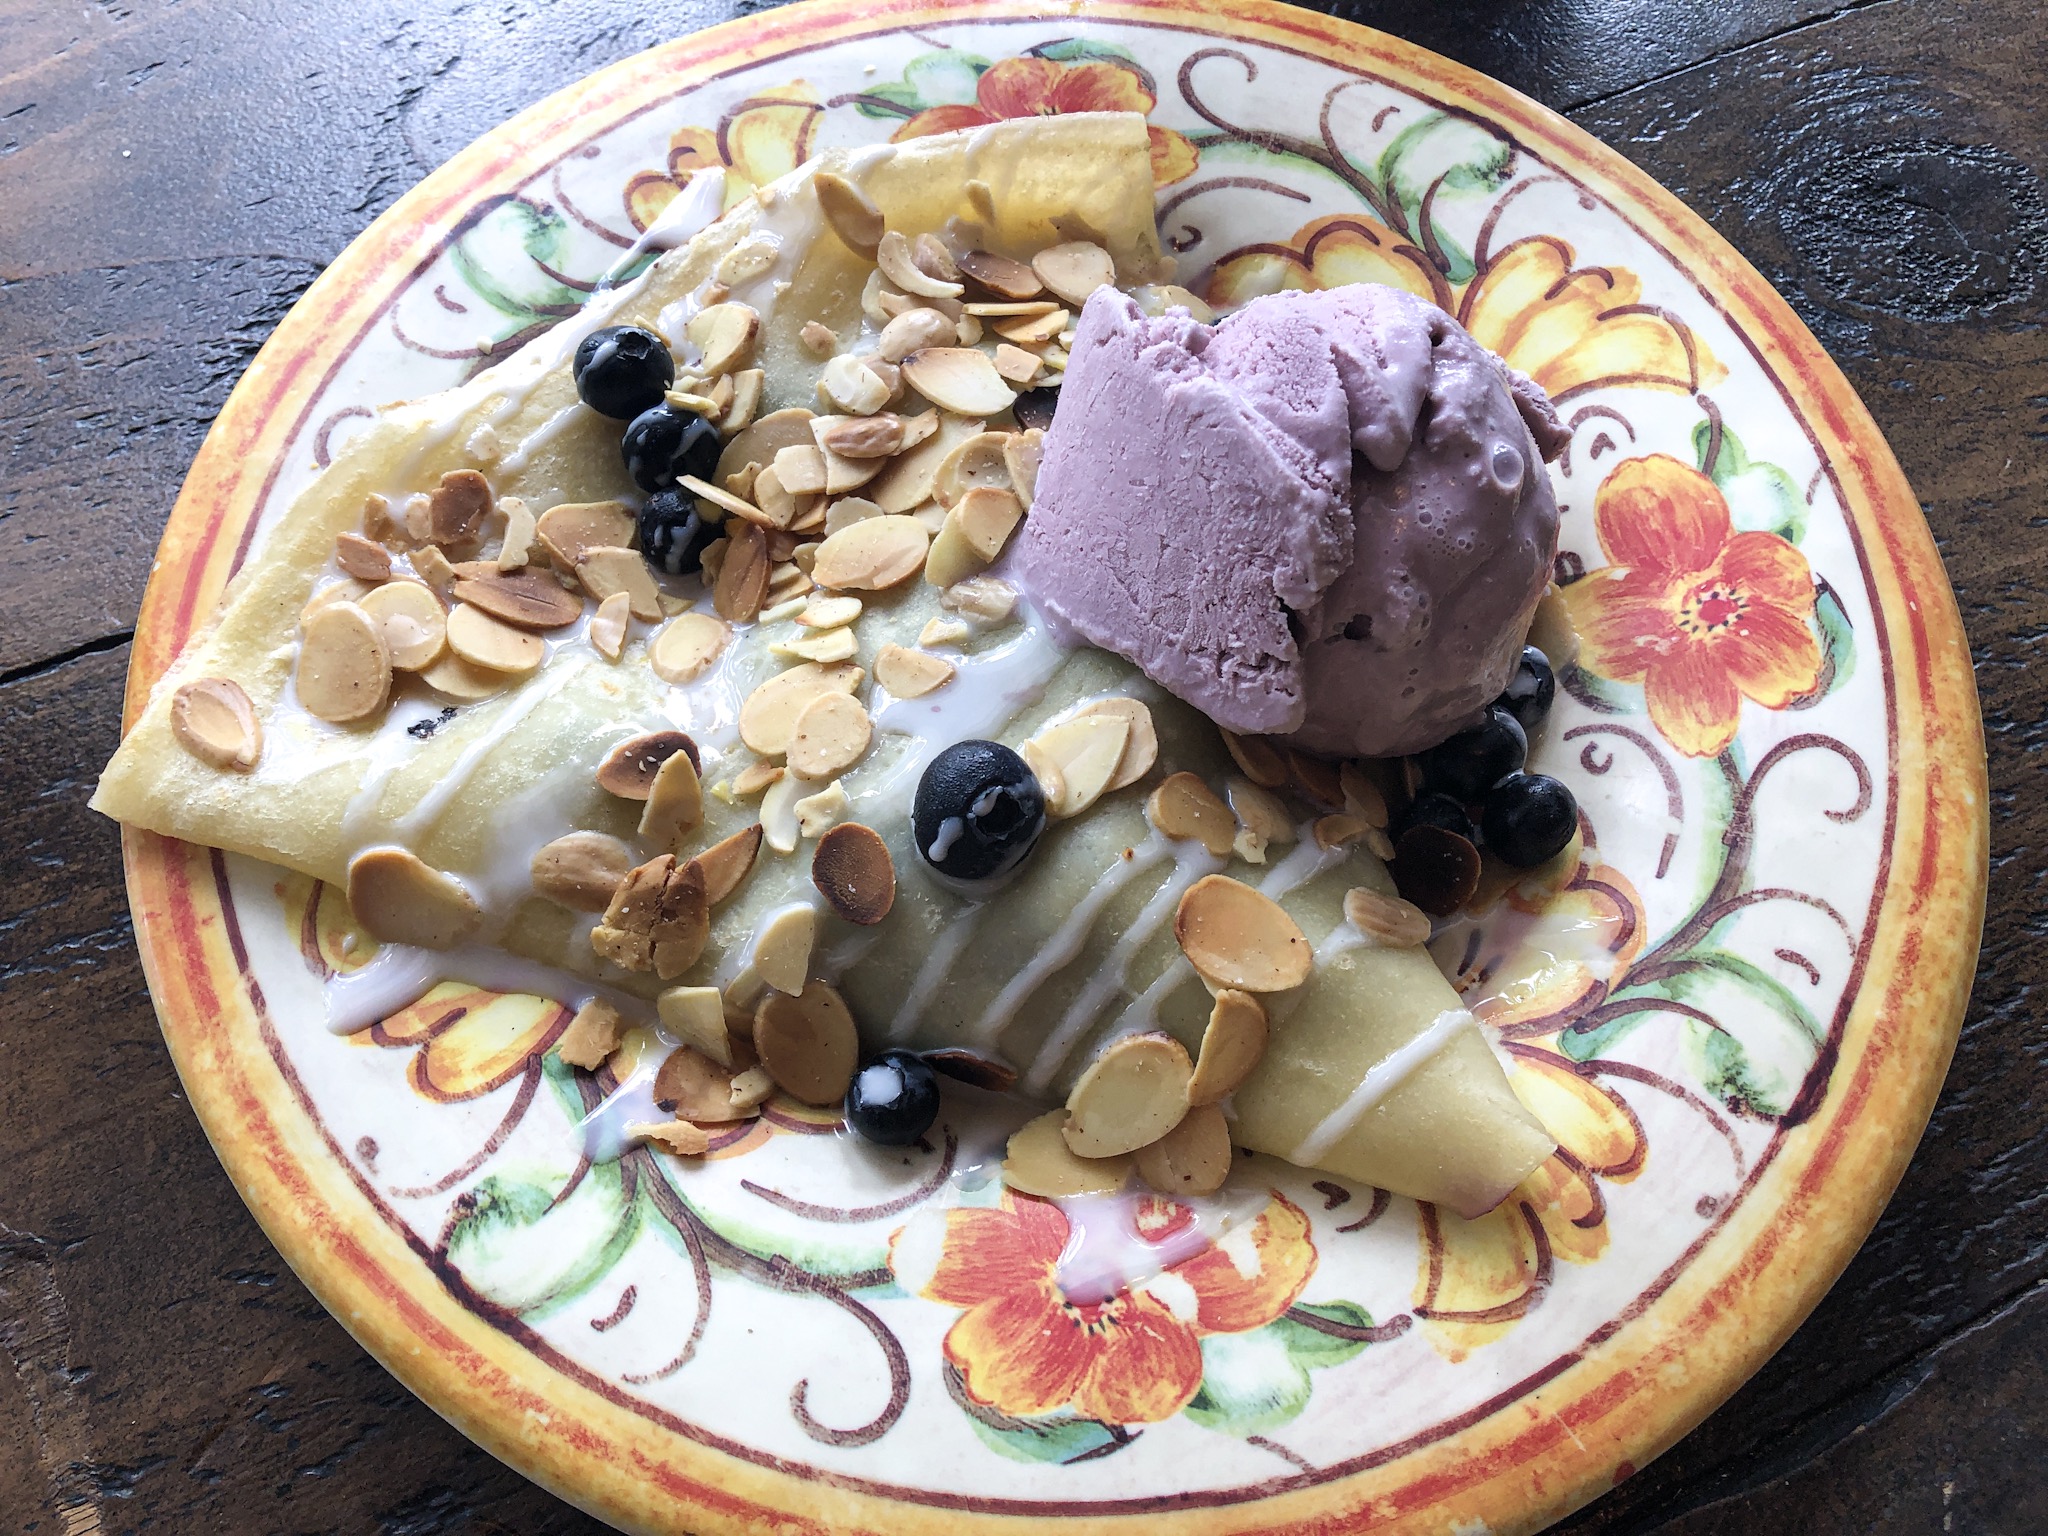 Wooden Rooster Blueberry Delight Crepe with Blueberry, Almonds and Black Raspberry Sorbet